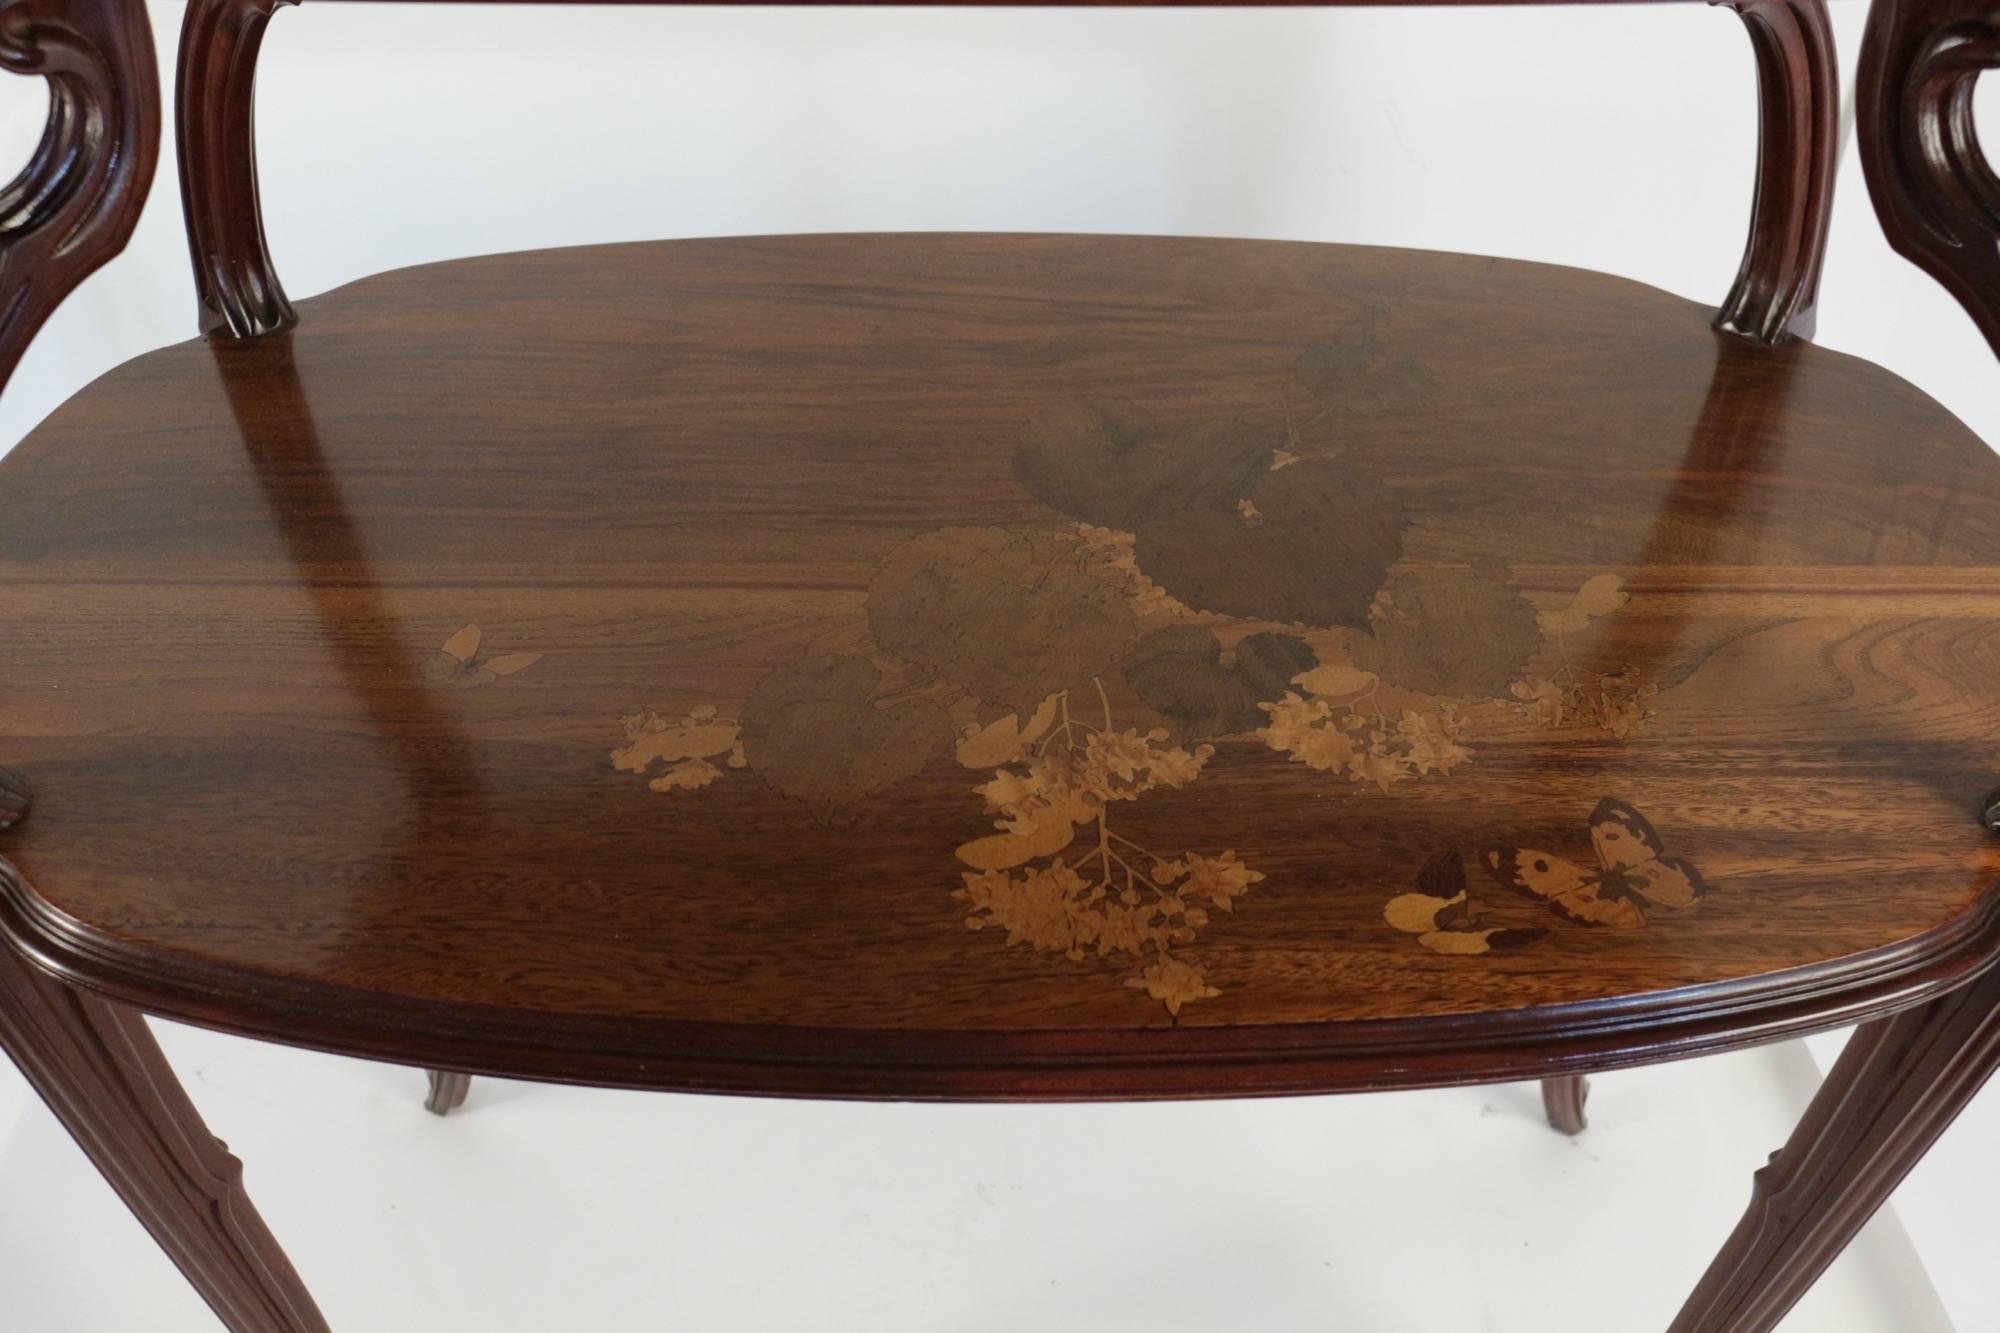 Art Nouveau Emile Galle Carved and Marquetry Side Table, circa 1900